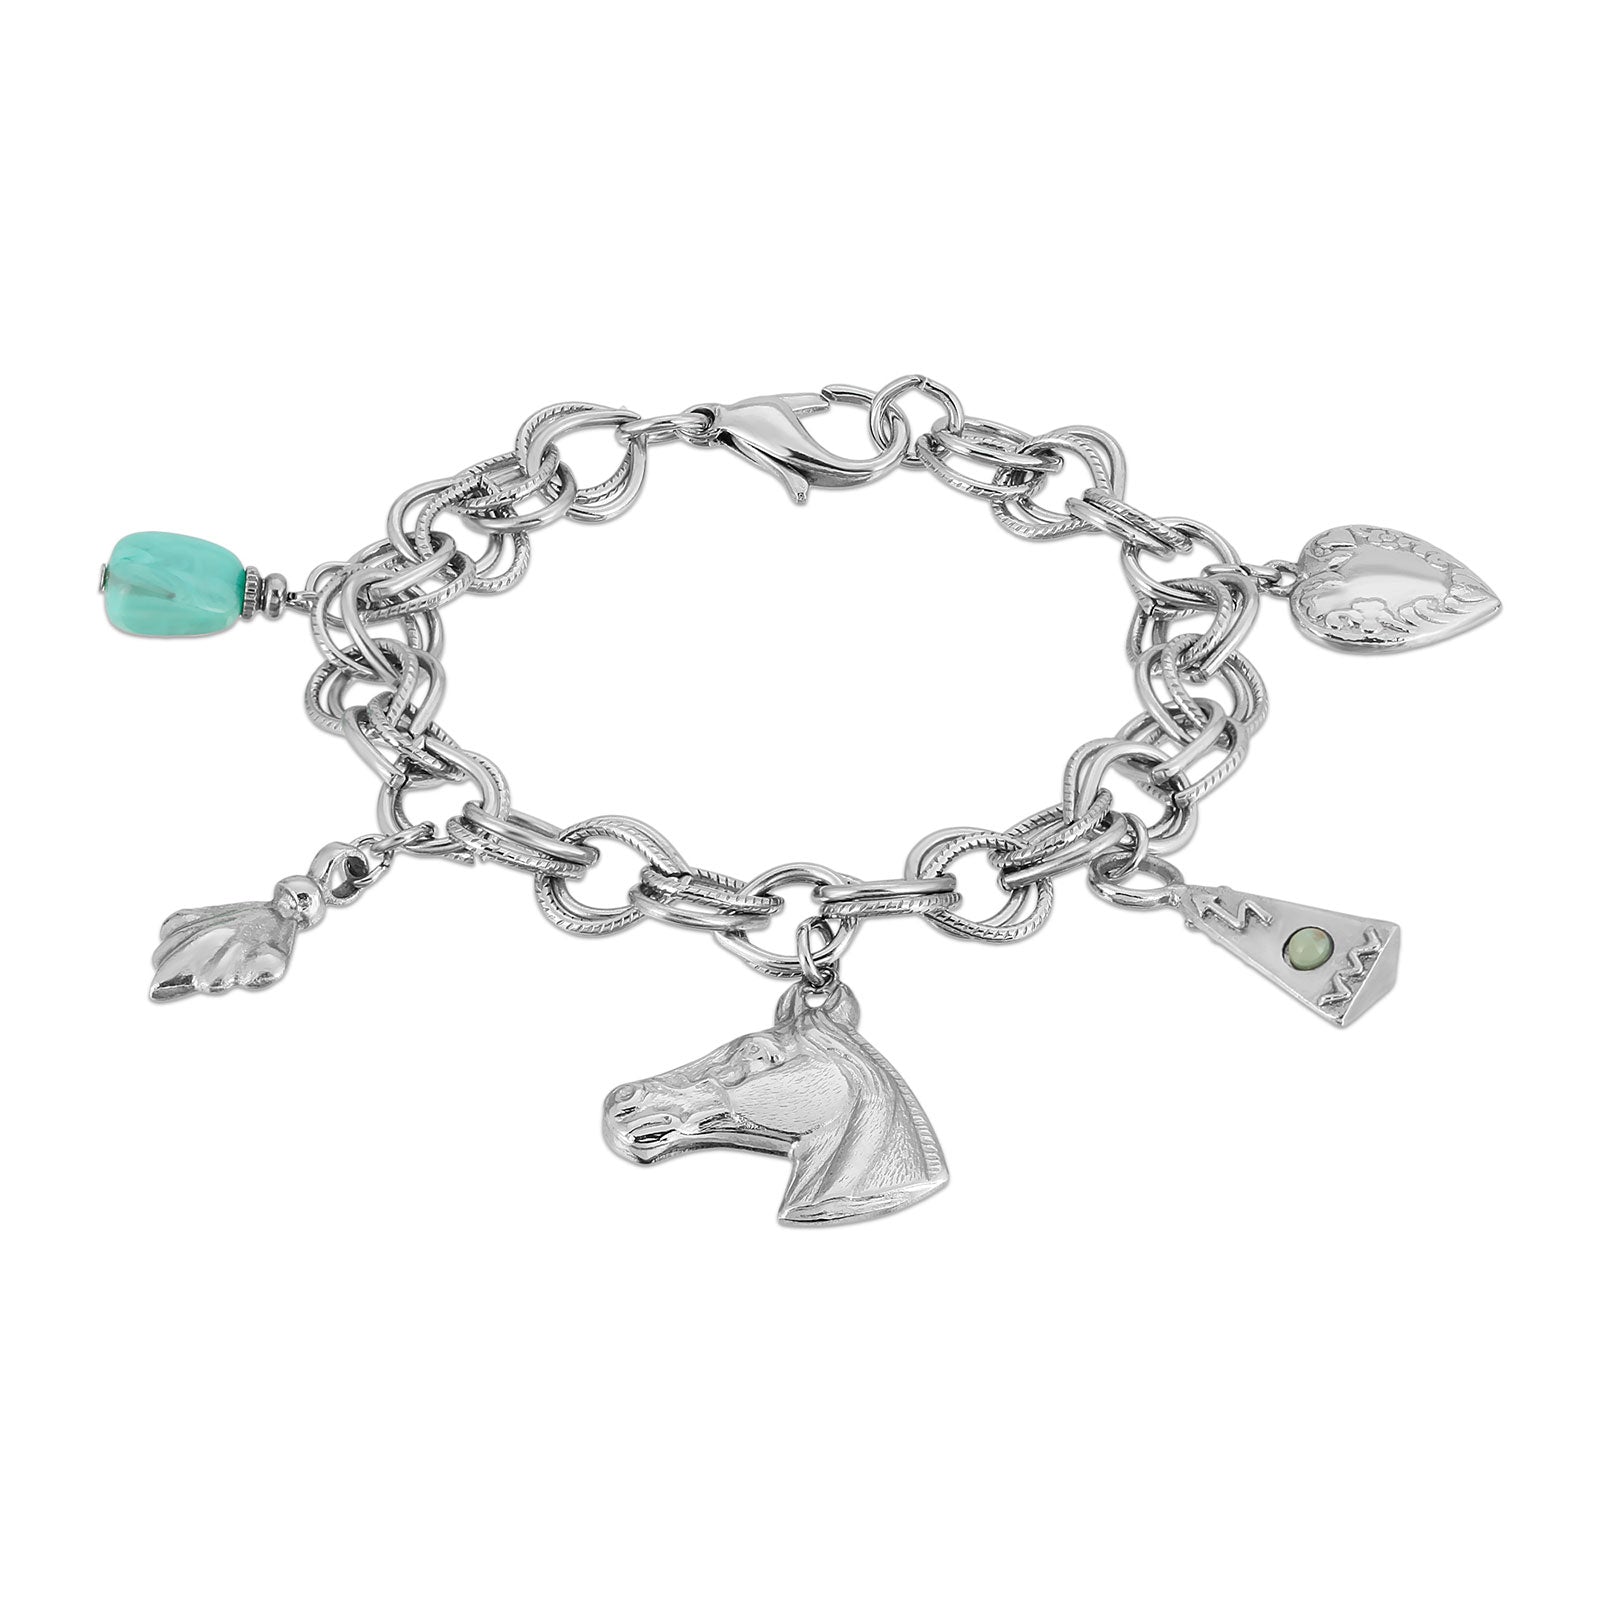 Silver-Tone Turquoise Color Accents and Multi-Charm Horse Bracelet